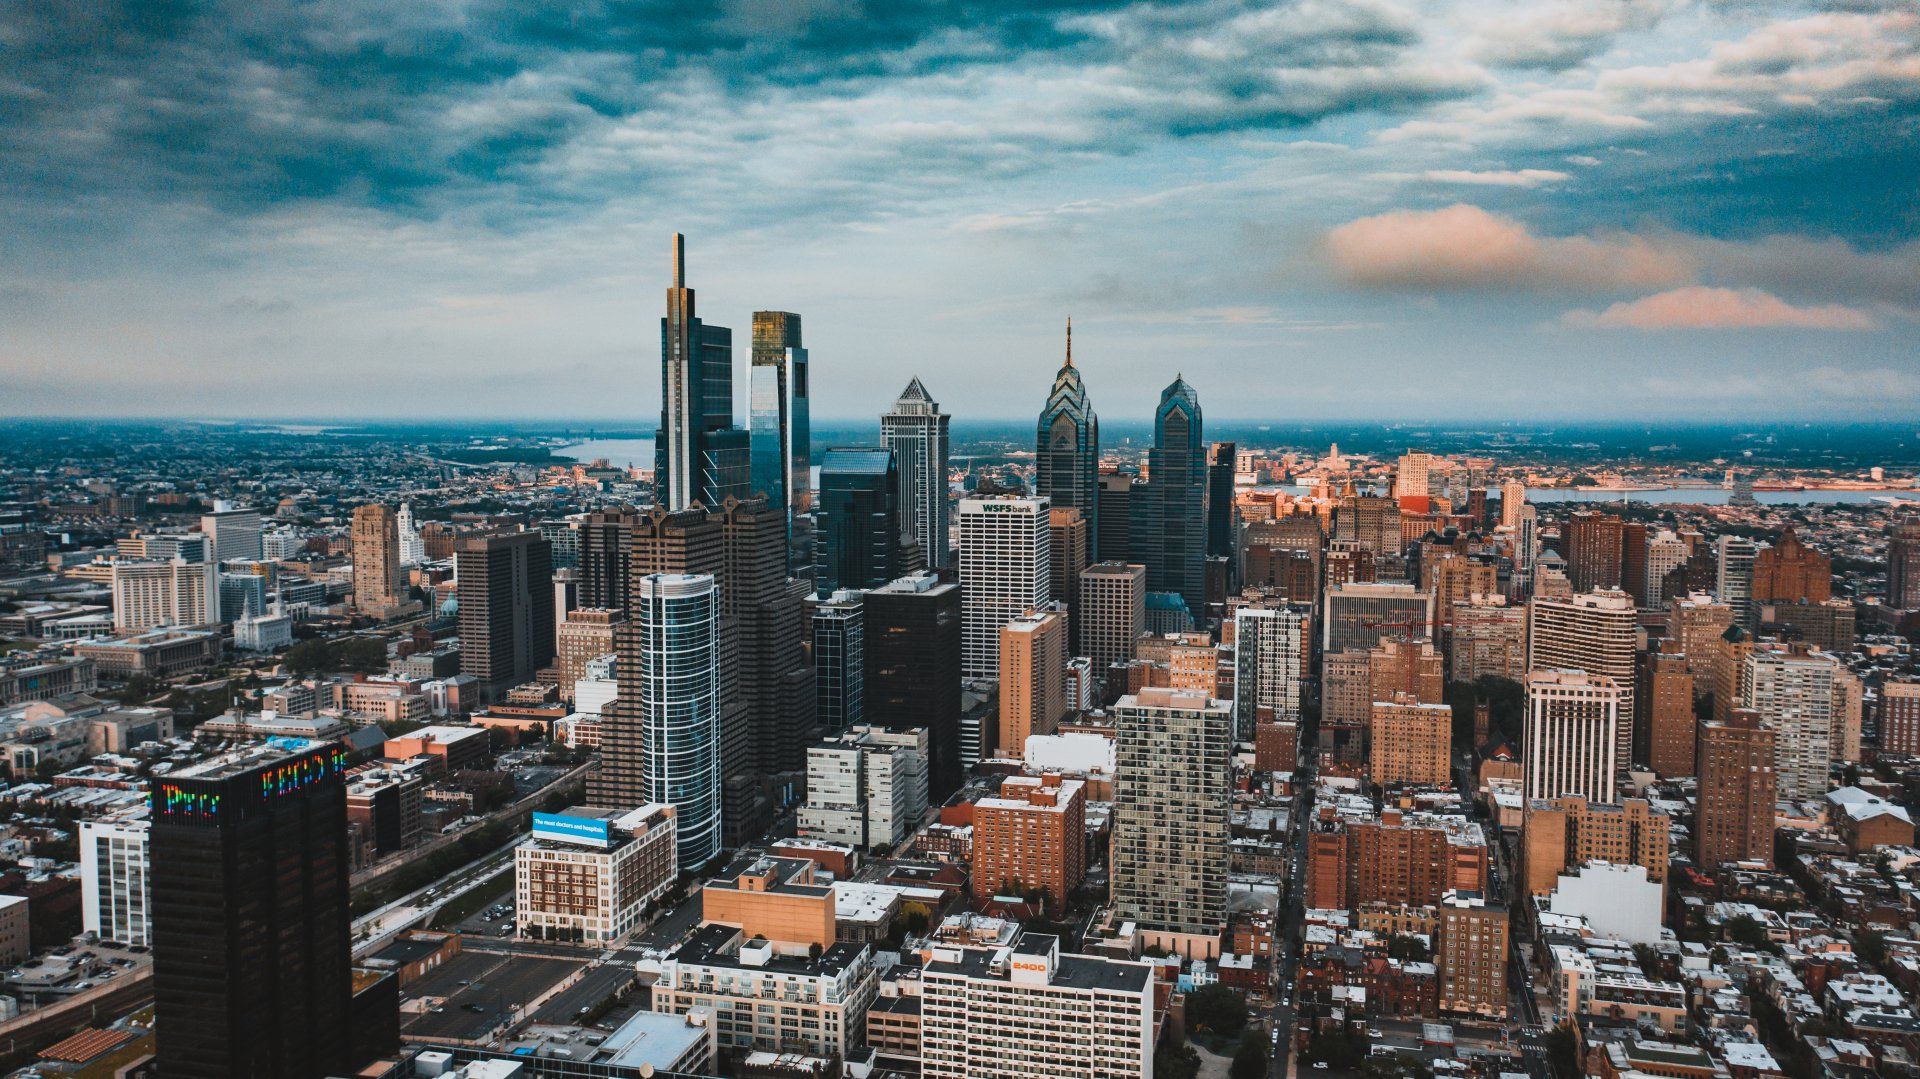 An aerial view of a Philadelphia city skyline with lots of buildings and a cloudy sky.